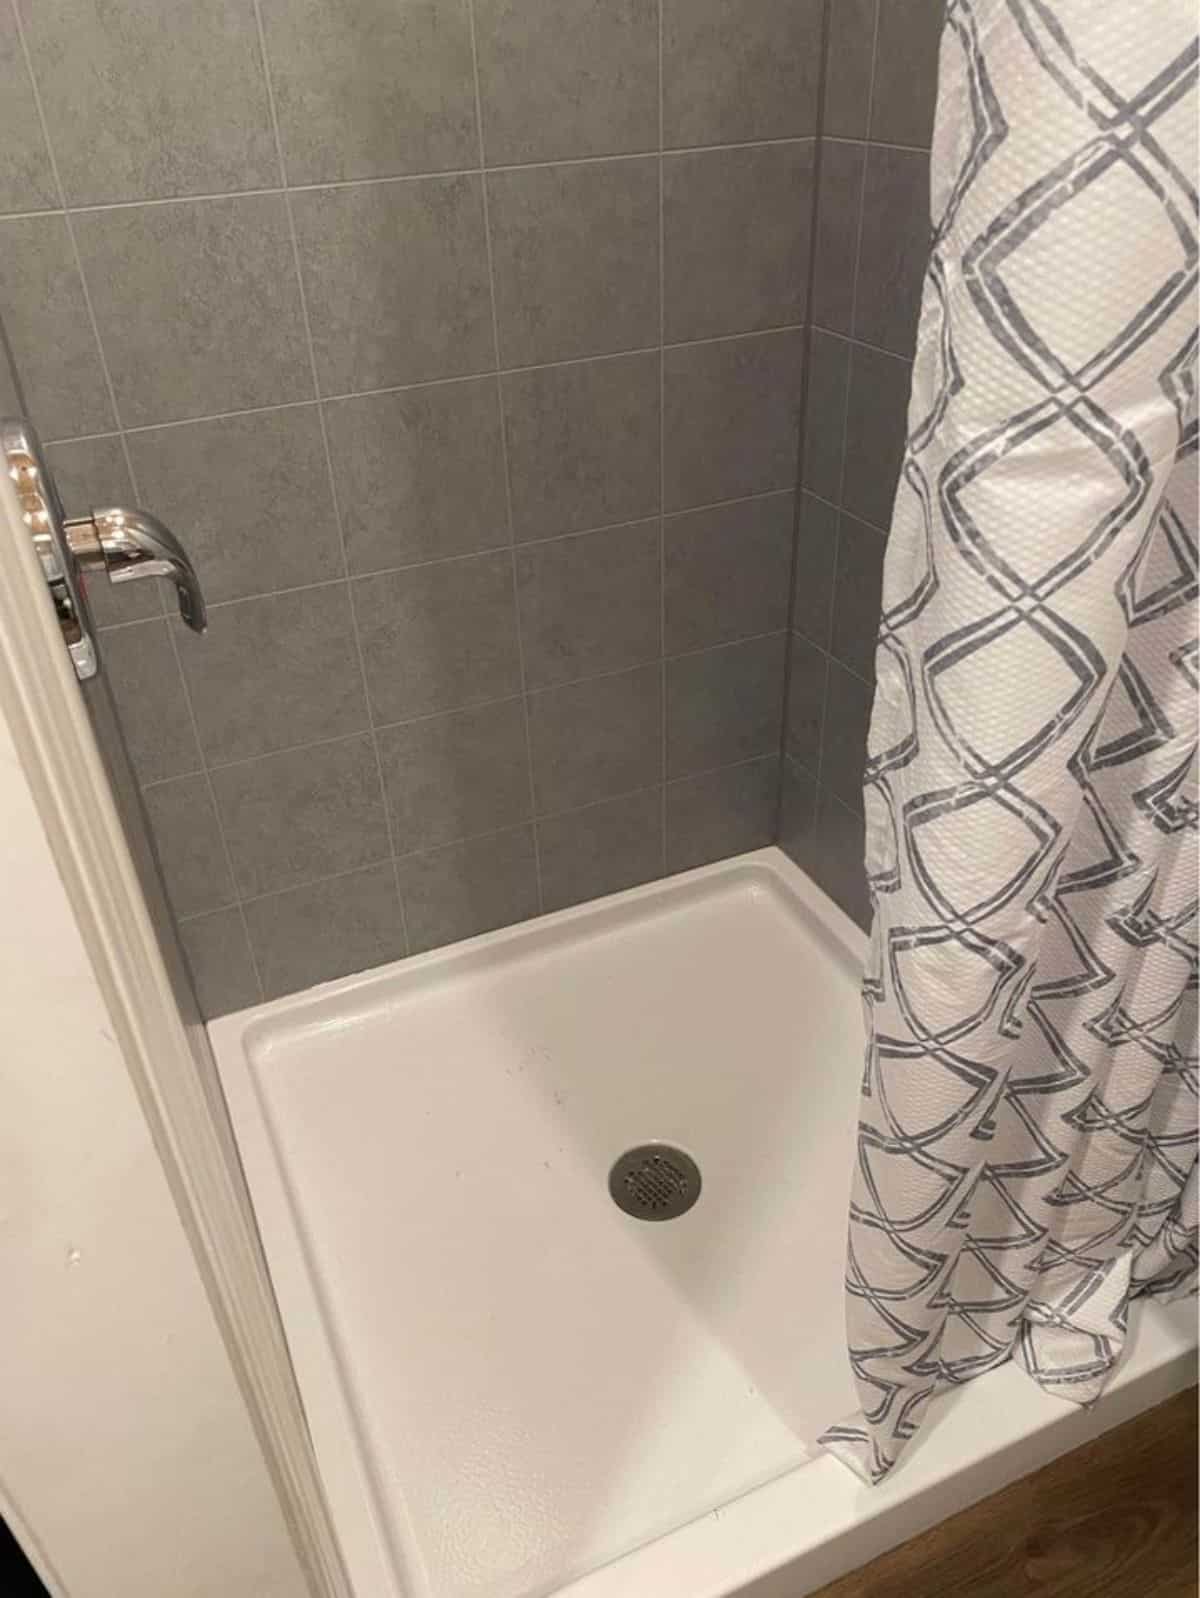 Separate shower area in bathroom of 20' Budget Friendly Tiny House